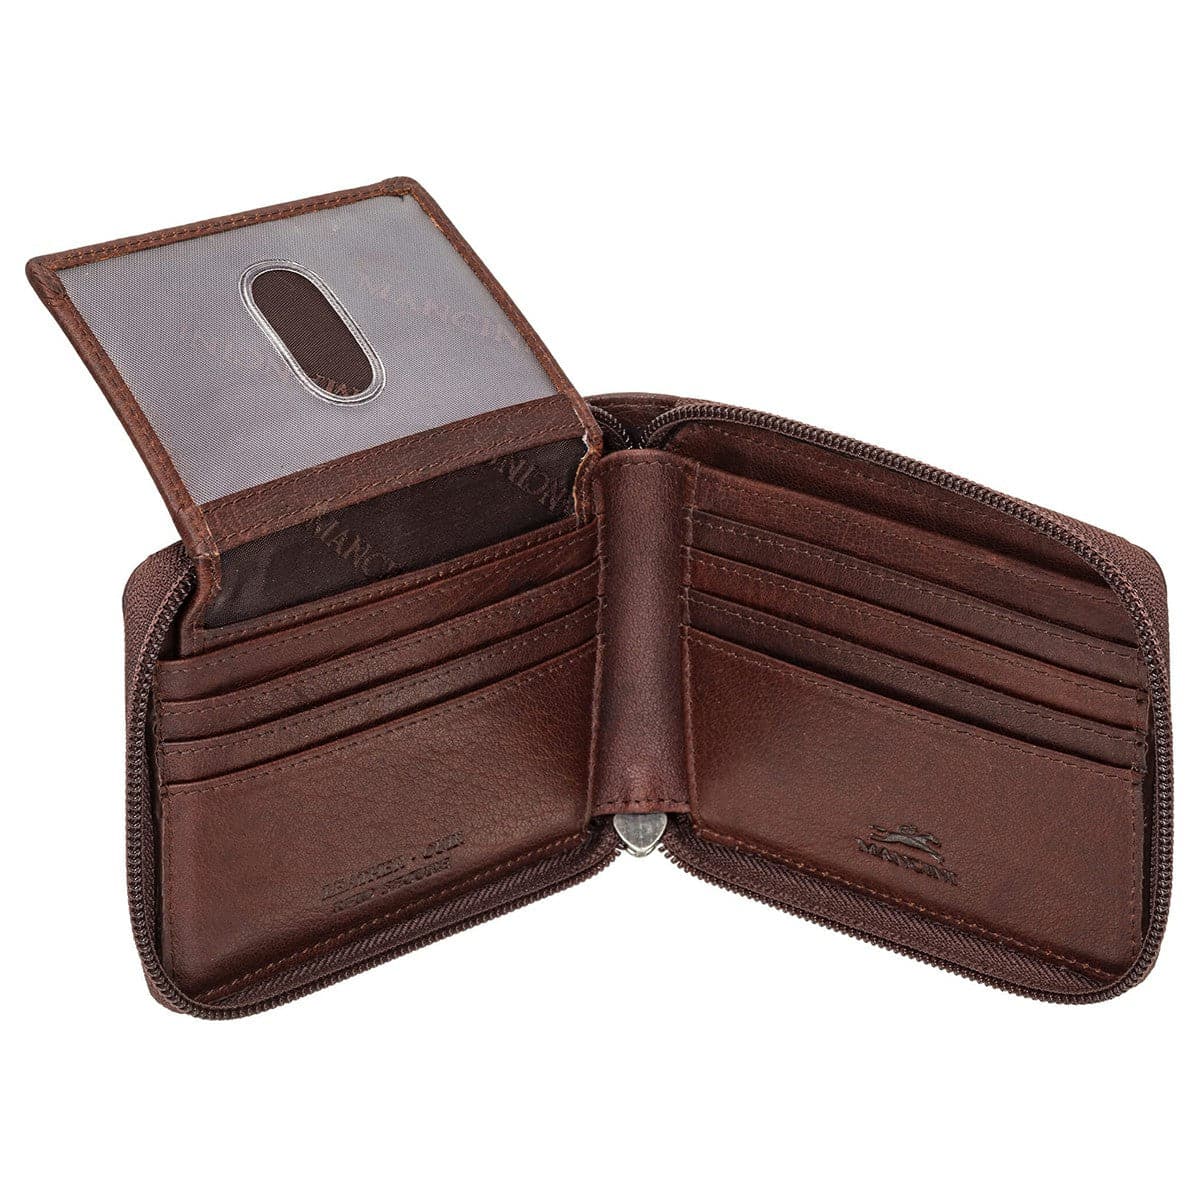 Mancini Buffalo RFID Secure Zippered Billfold with Removable Passcase